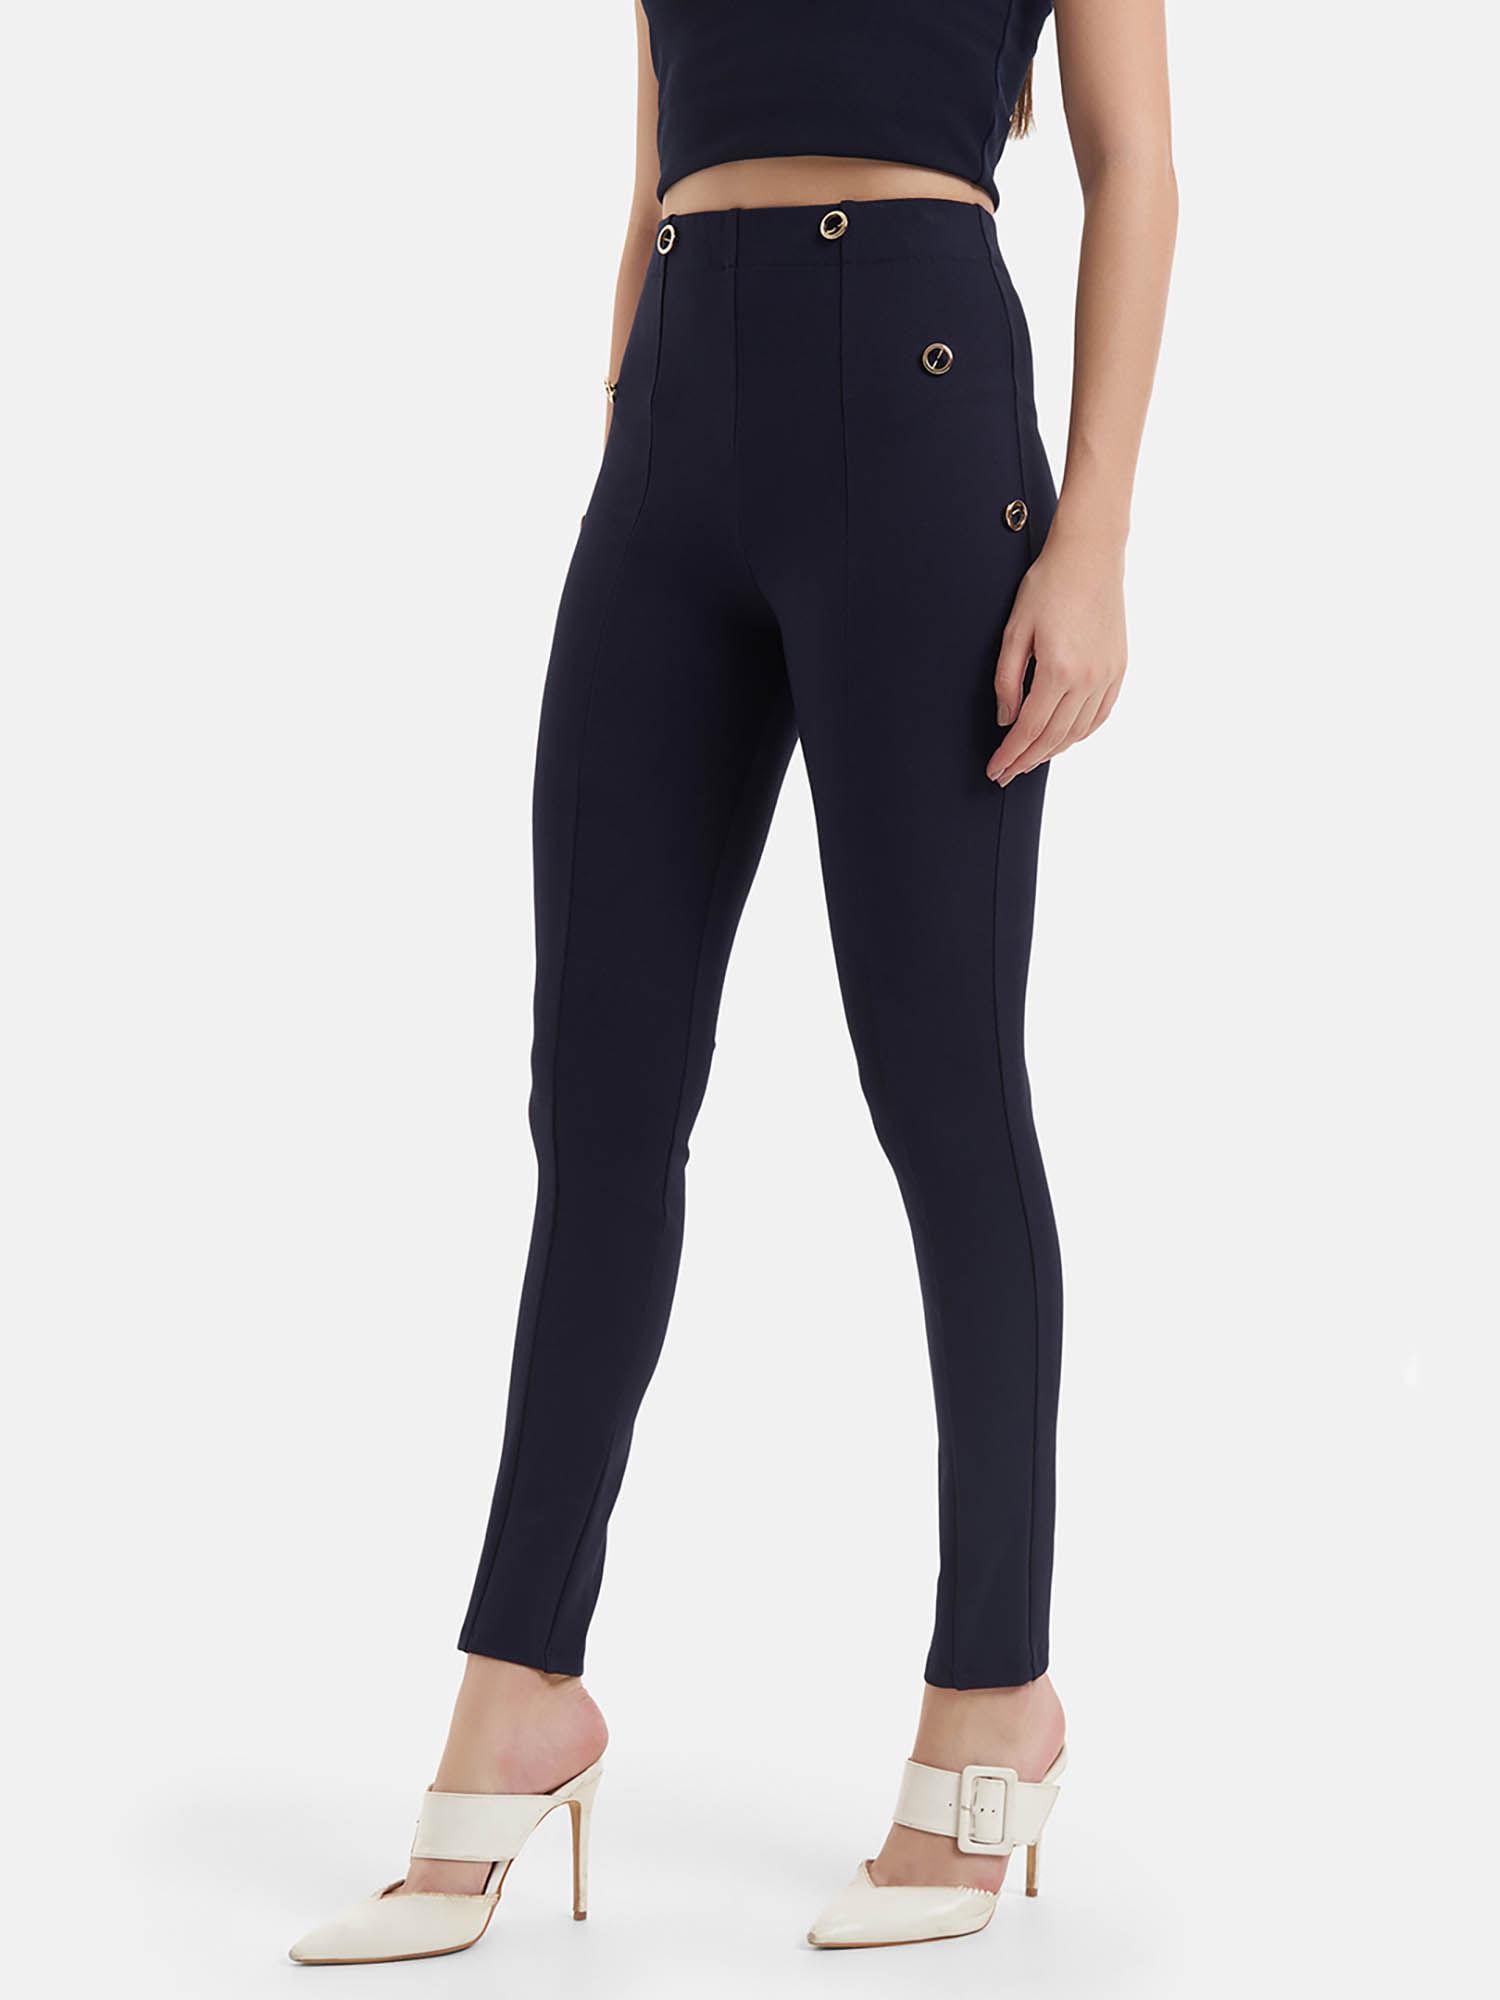 gold button detail jeggings with pin seam at front